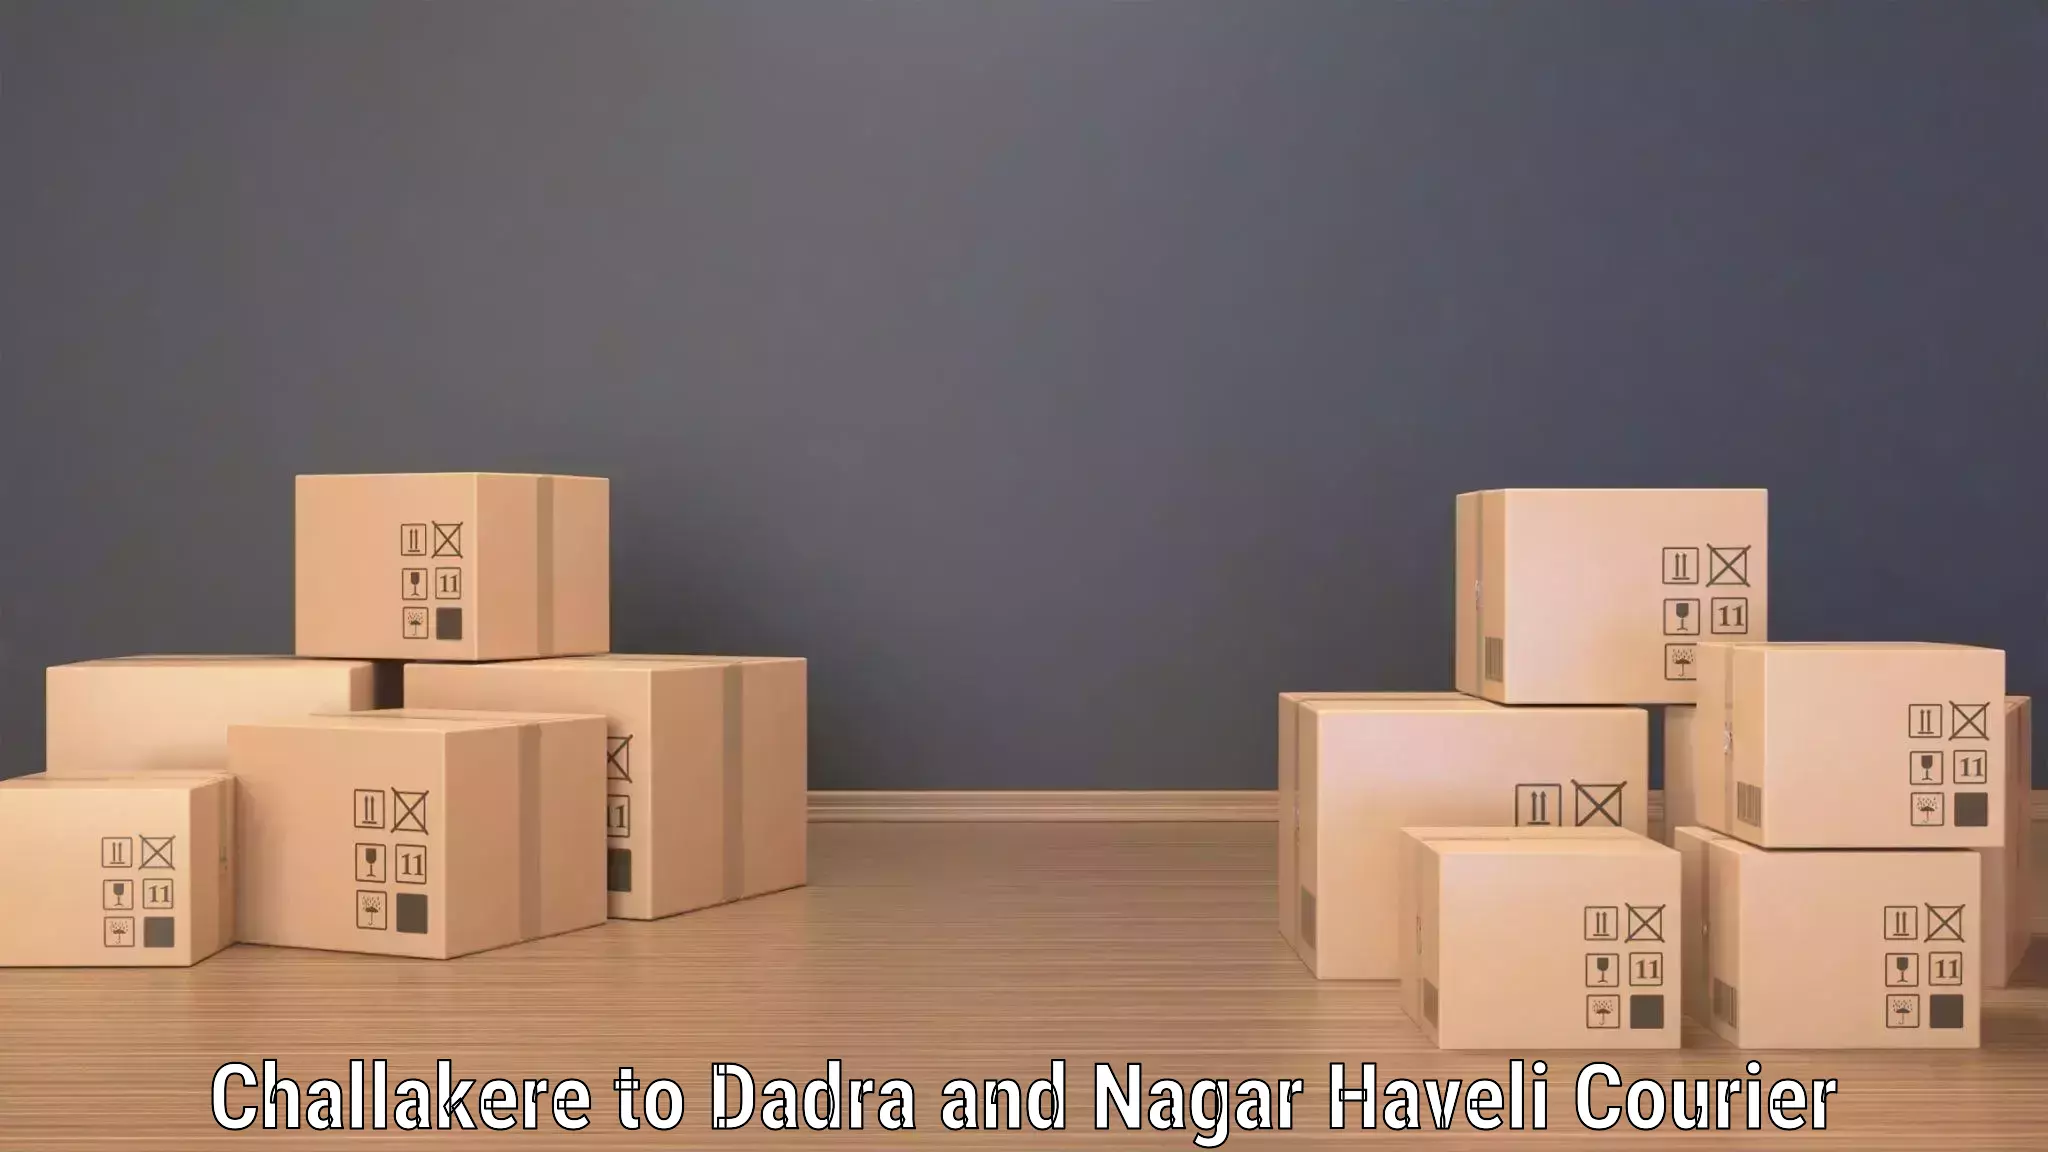 Ocean freight courier in Challakere to Dadra and Nagar Haveli